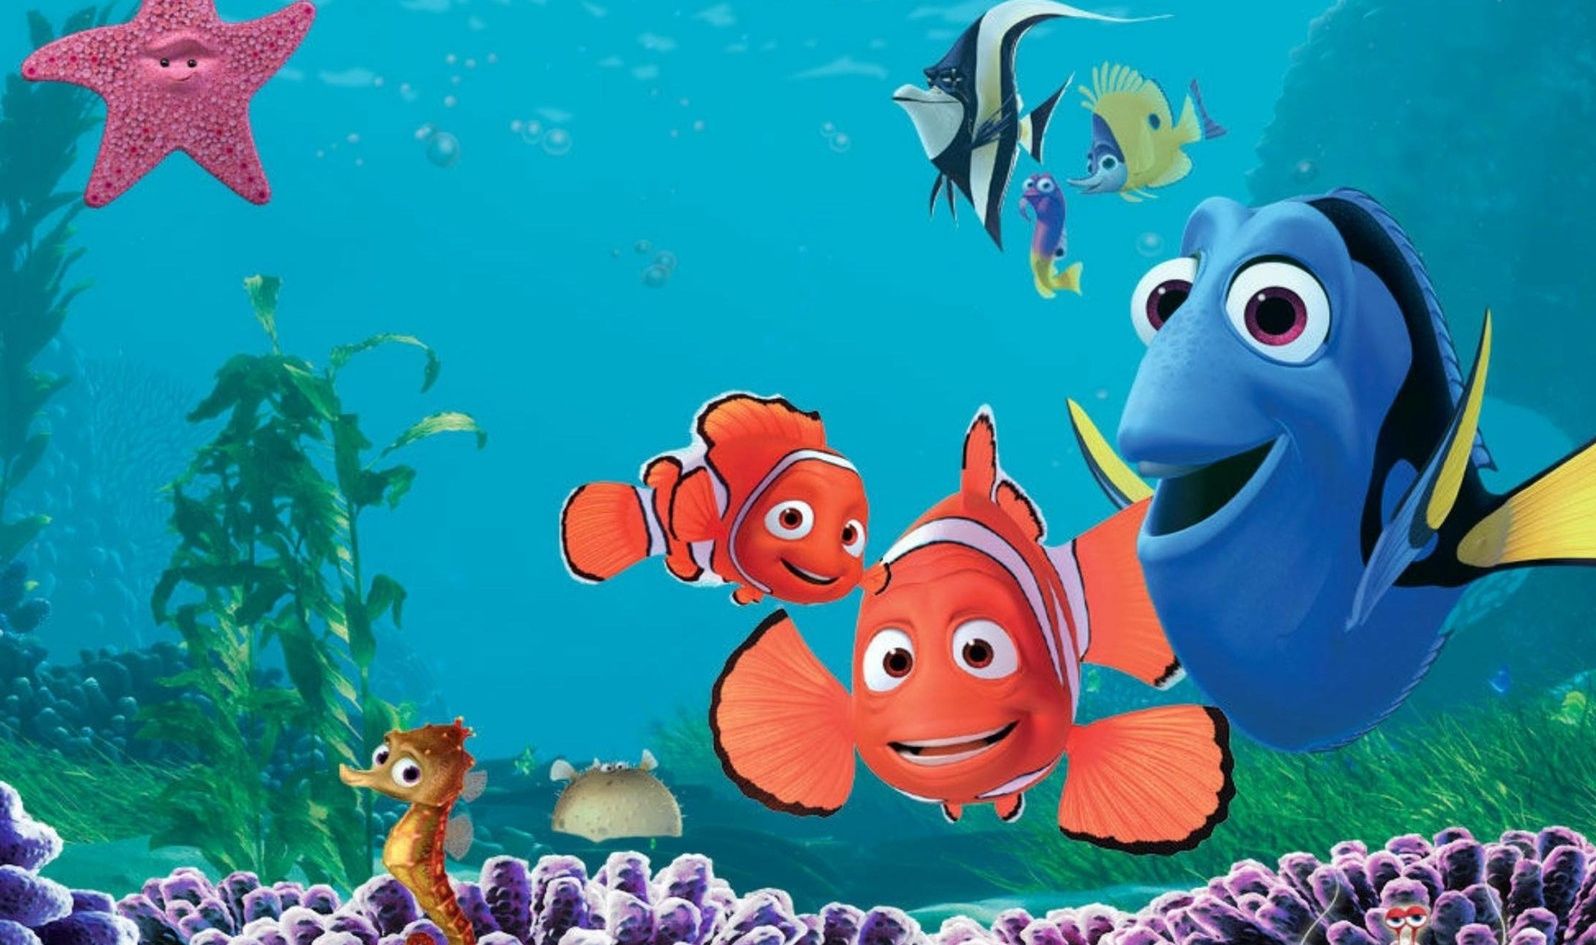 Best 27+ Finding Nemo Twitter Backgrounds on HipWallpapers.